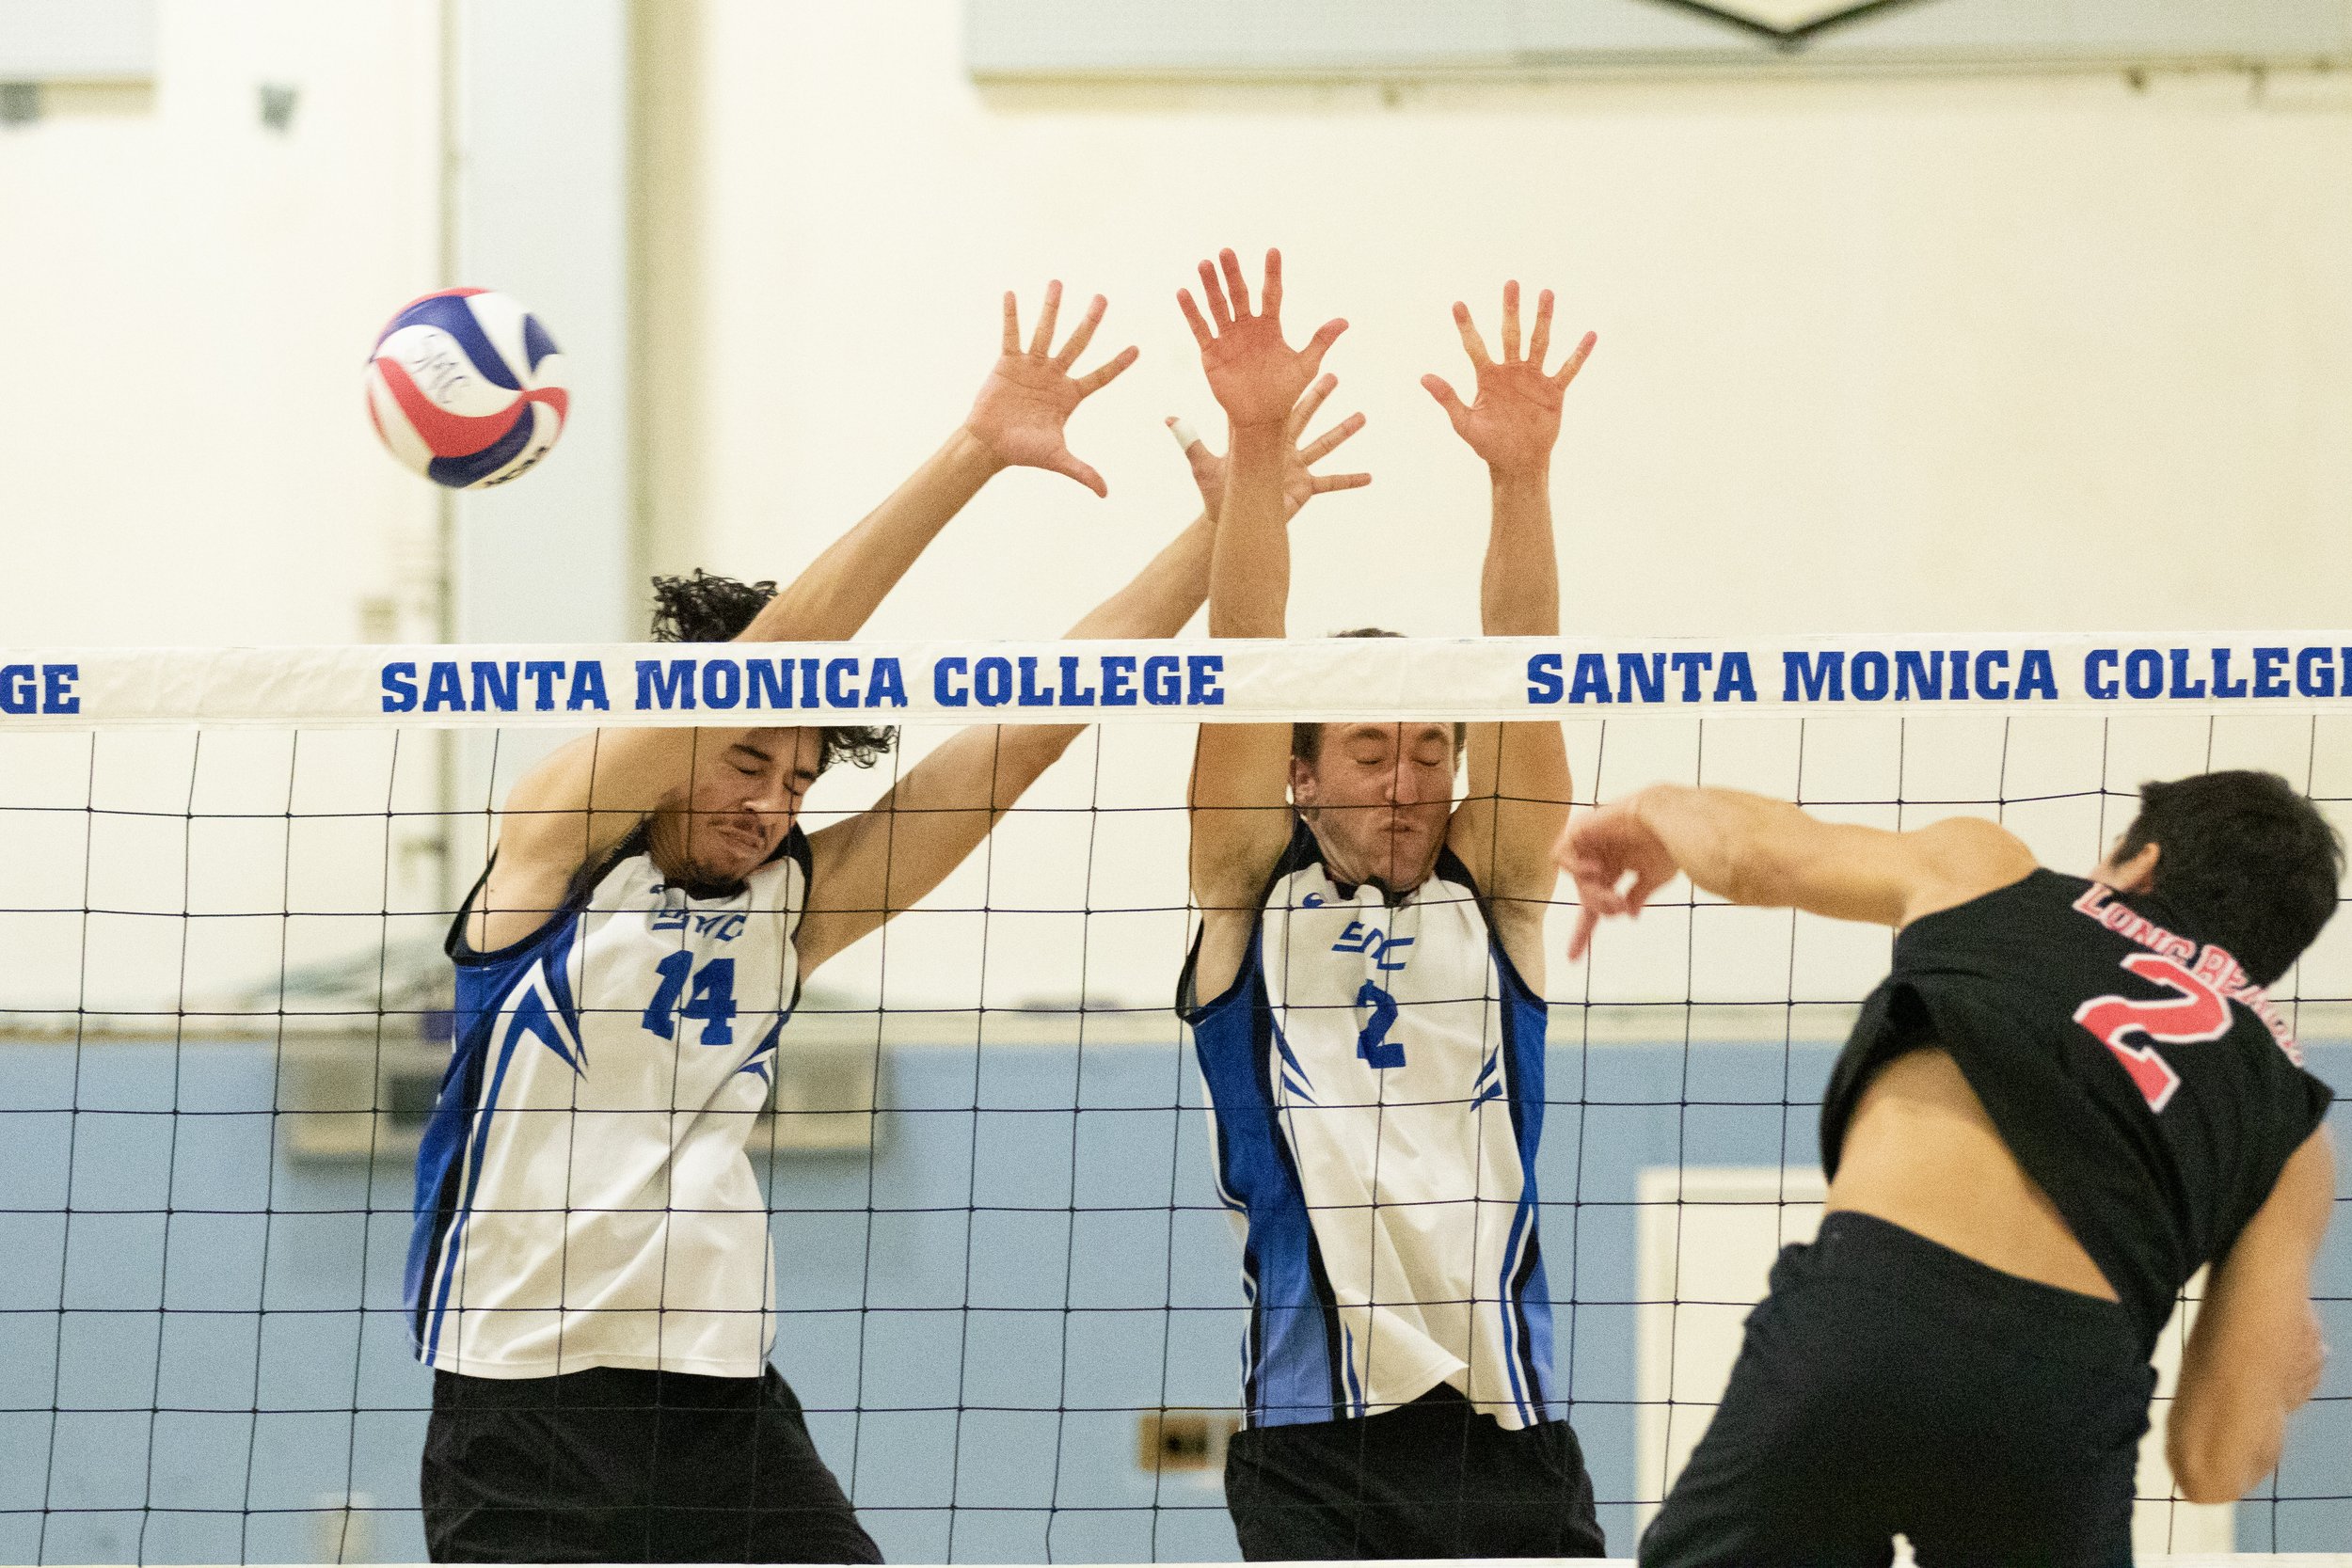  Santa Monica College Corsairs opposite Luis Garzon (14, left) and outside hitter Kane Schwengel (2, center) attempting to block a spike by Long Beach City College Viking Georgi Binev (2, right) during the third set of a home game in Santa Monica, Ca